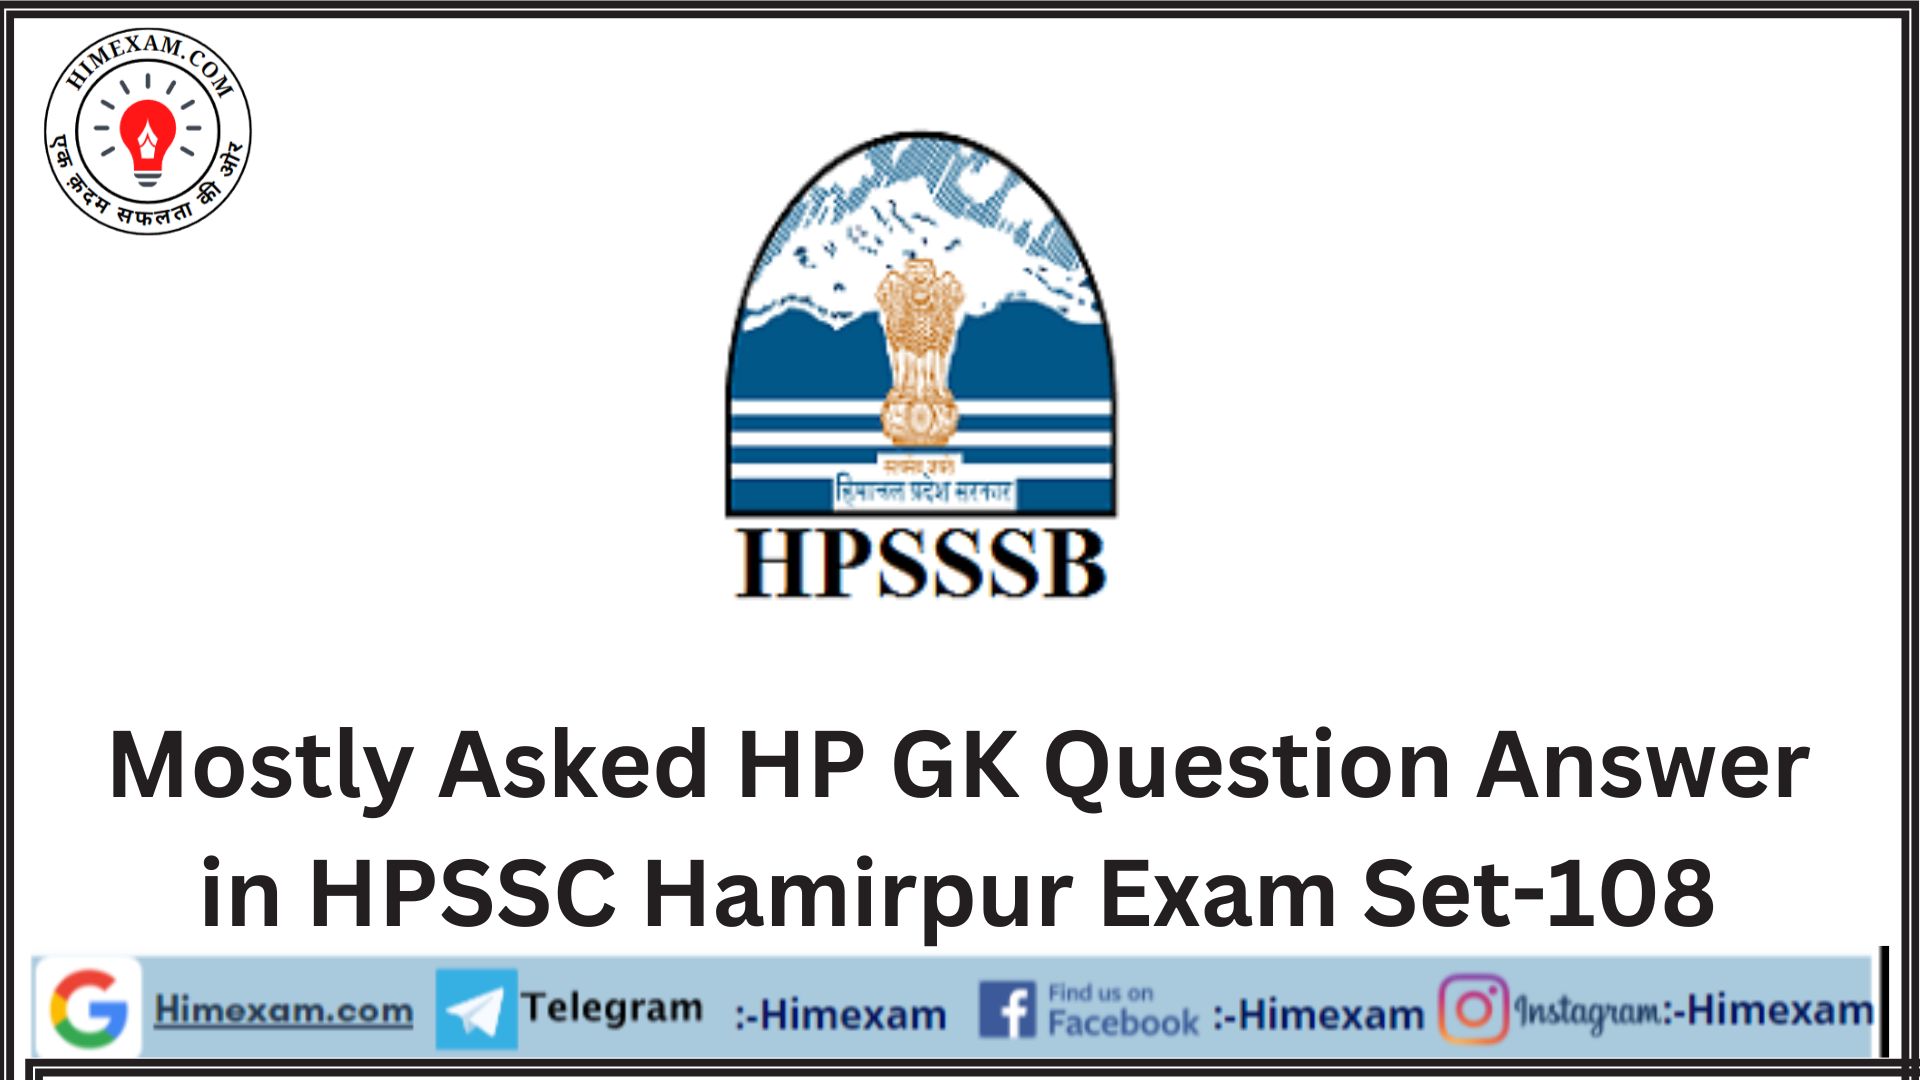 Mostly Asked HP GK Question Answer in HPSSC Hamirpur Exam Set-108